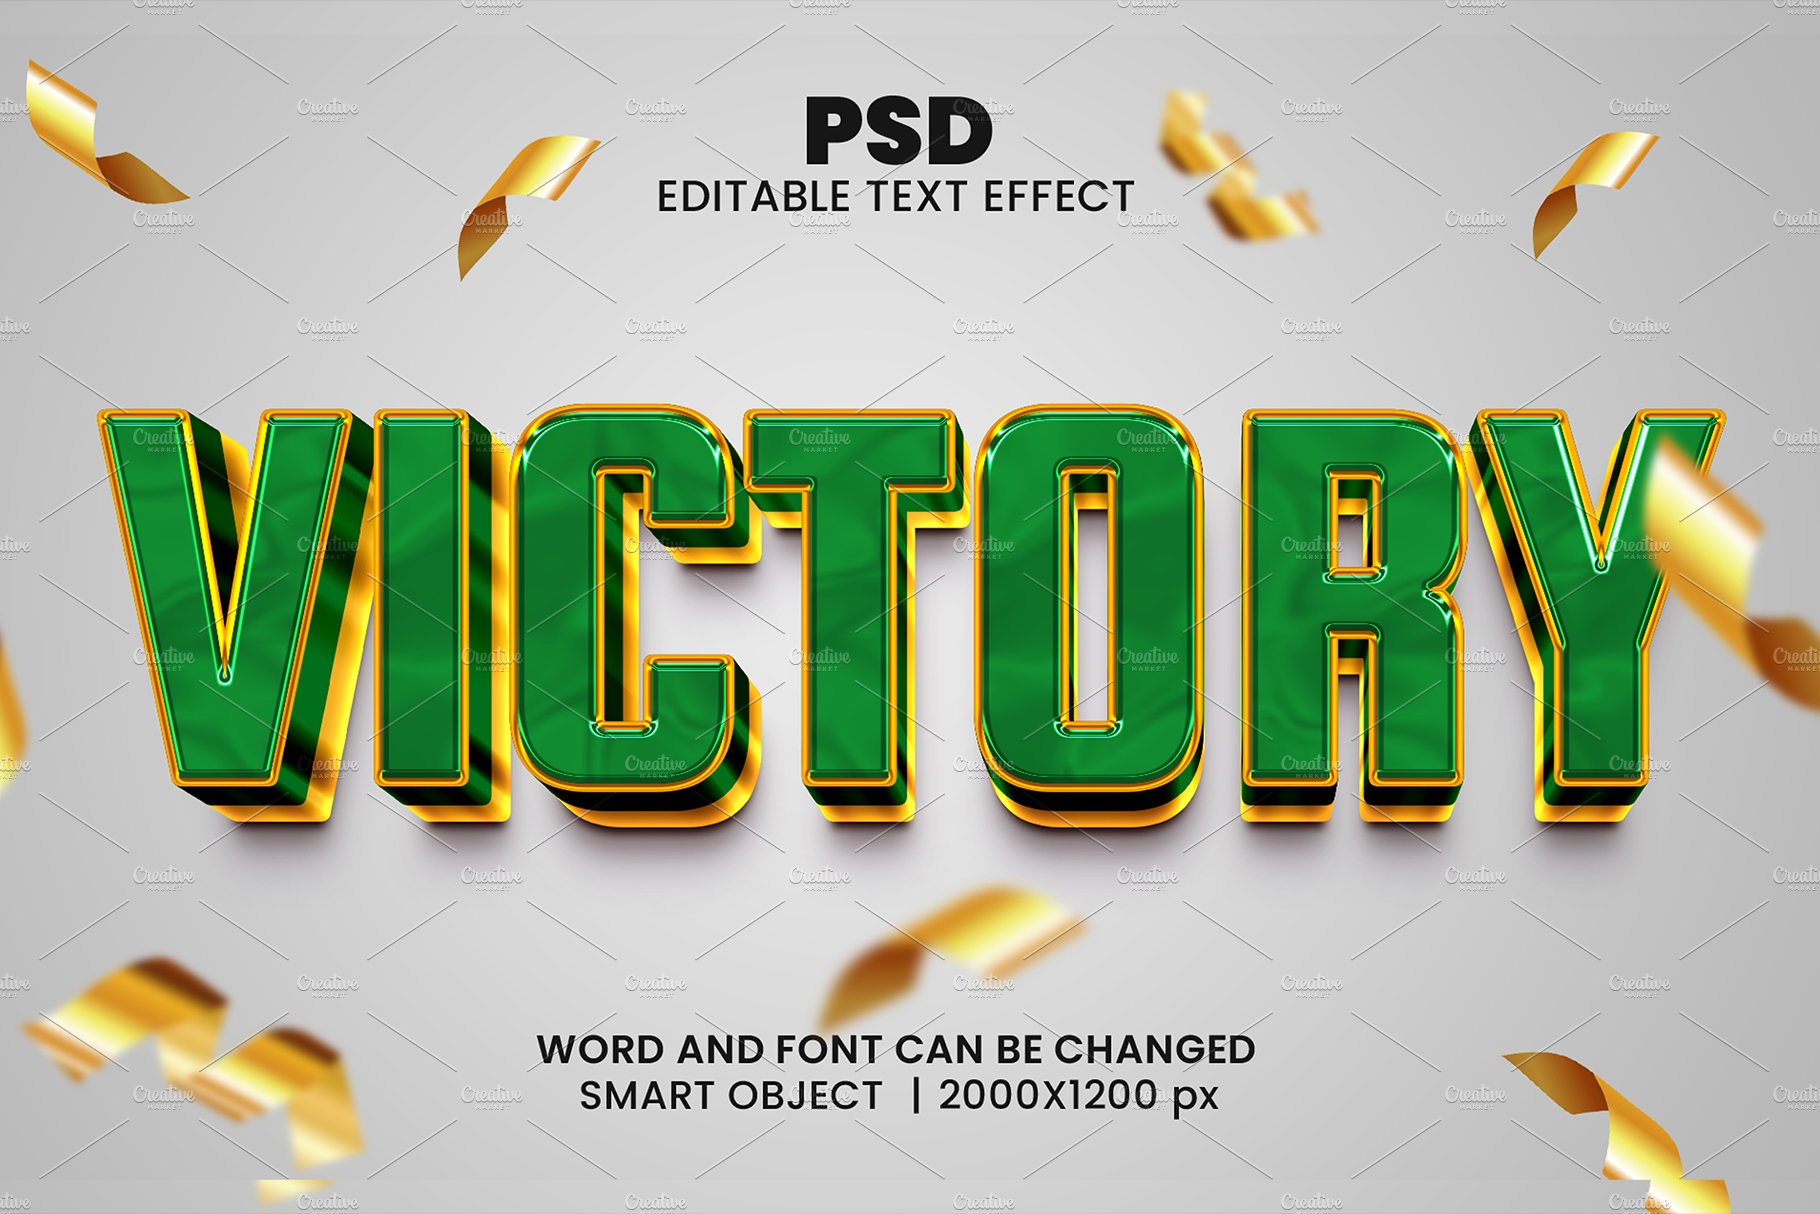 Victory 3d Psd Text Effectcover image.